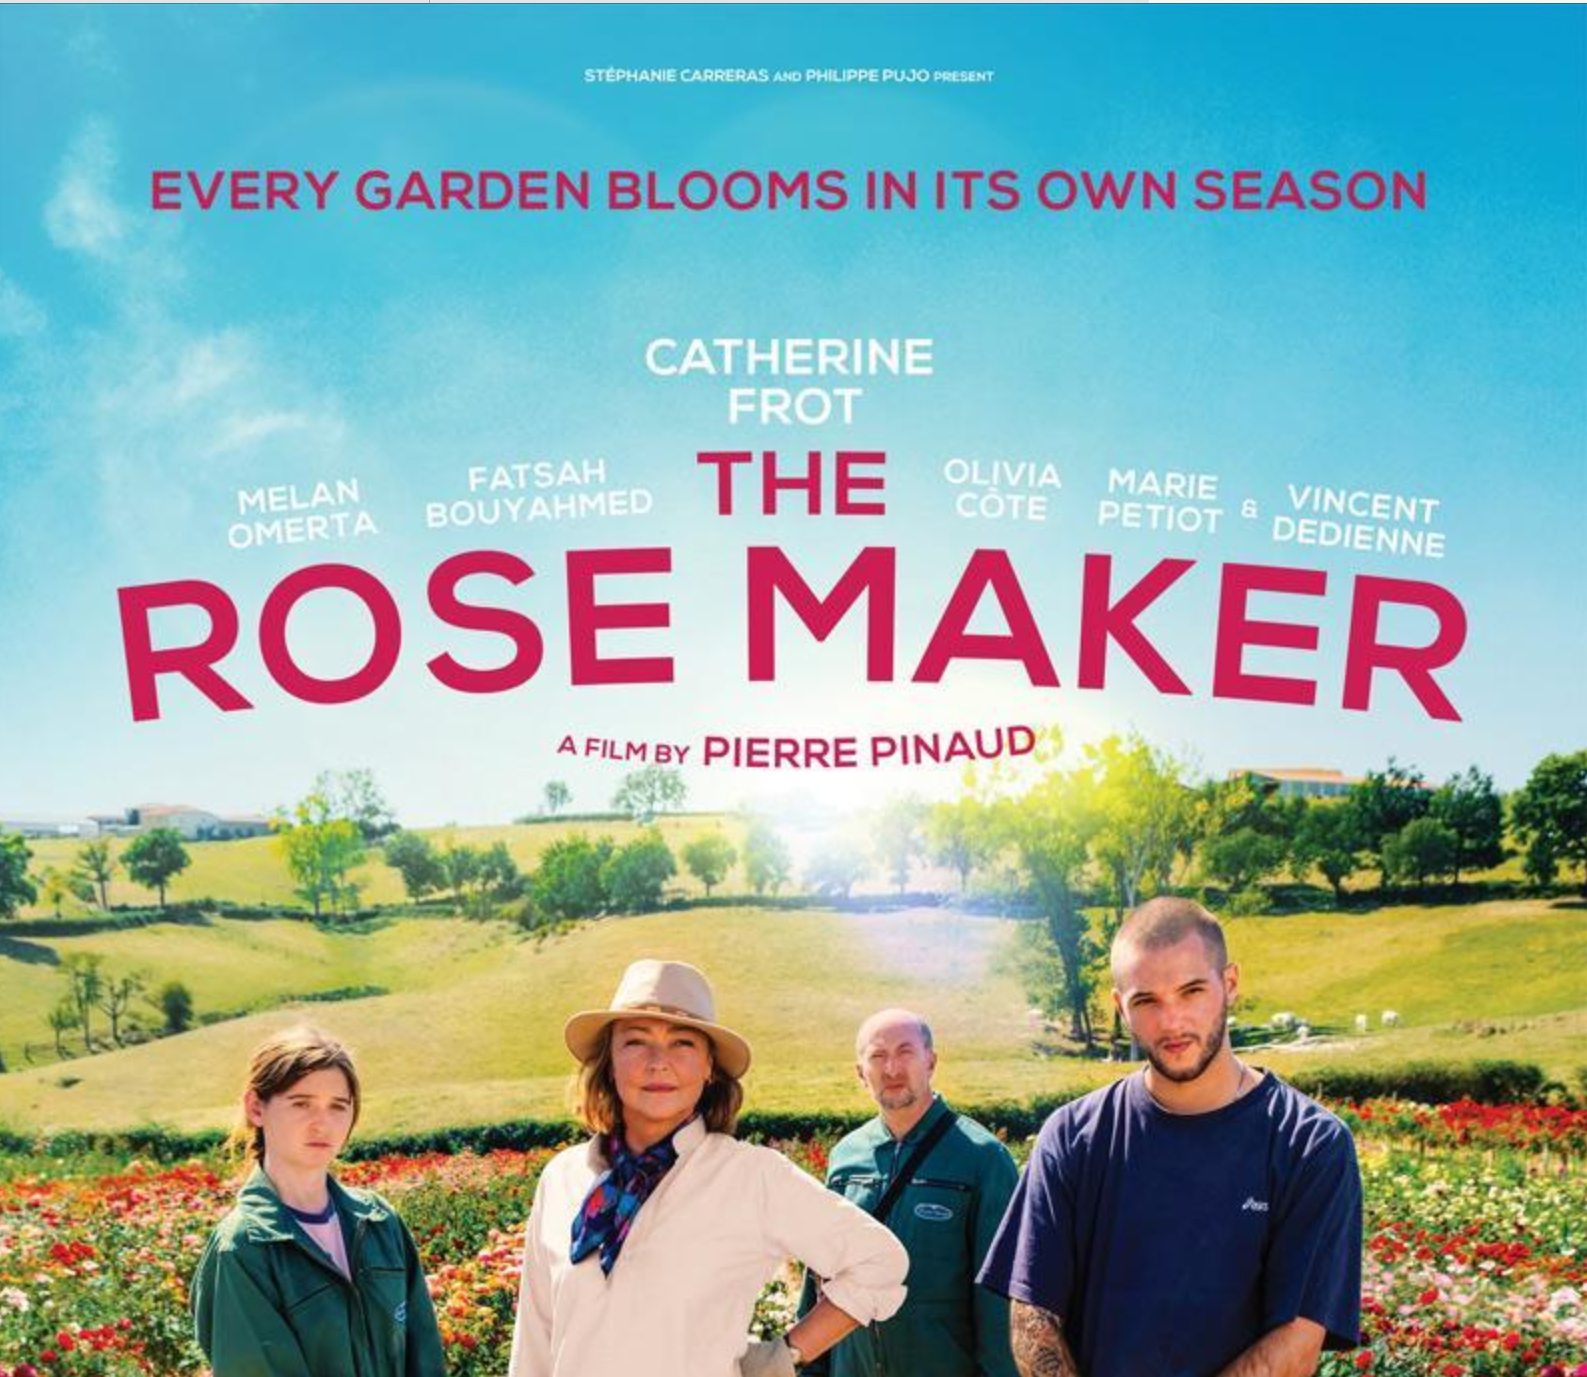 The Rose Maker: Offbeat Comedy About Planting Seeds of Hope